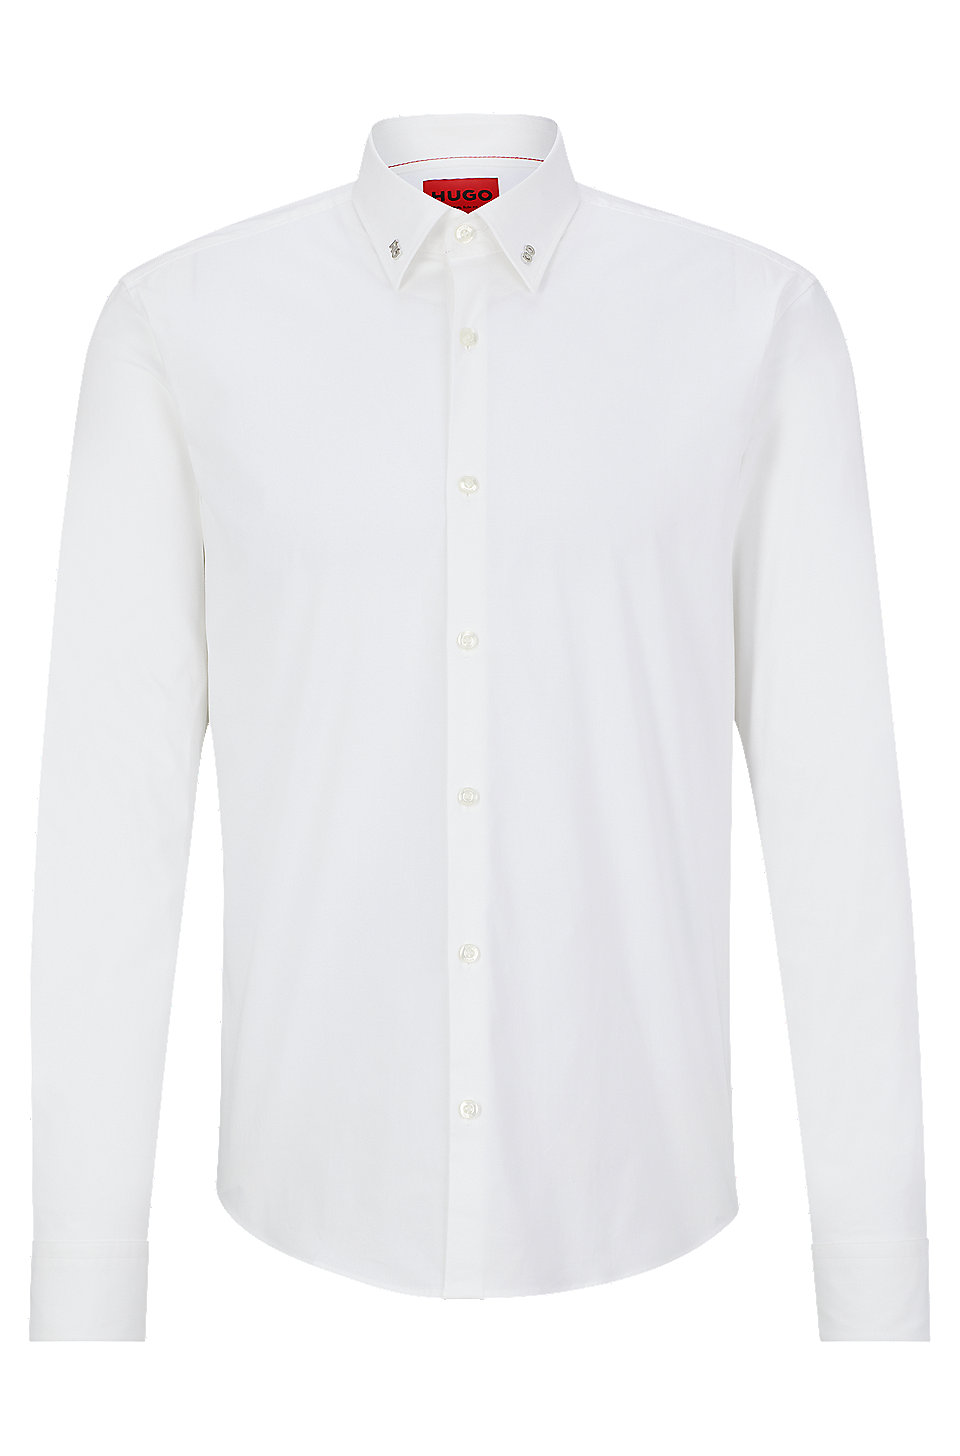 HUGO - Slim-fit shirt in stretch cotton with logo hardware